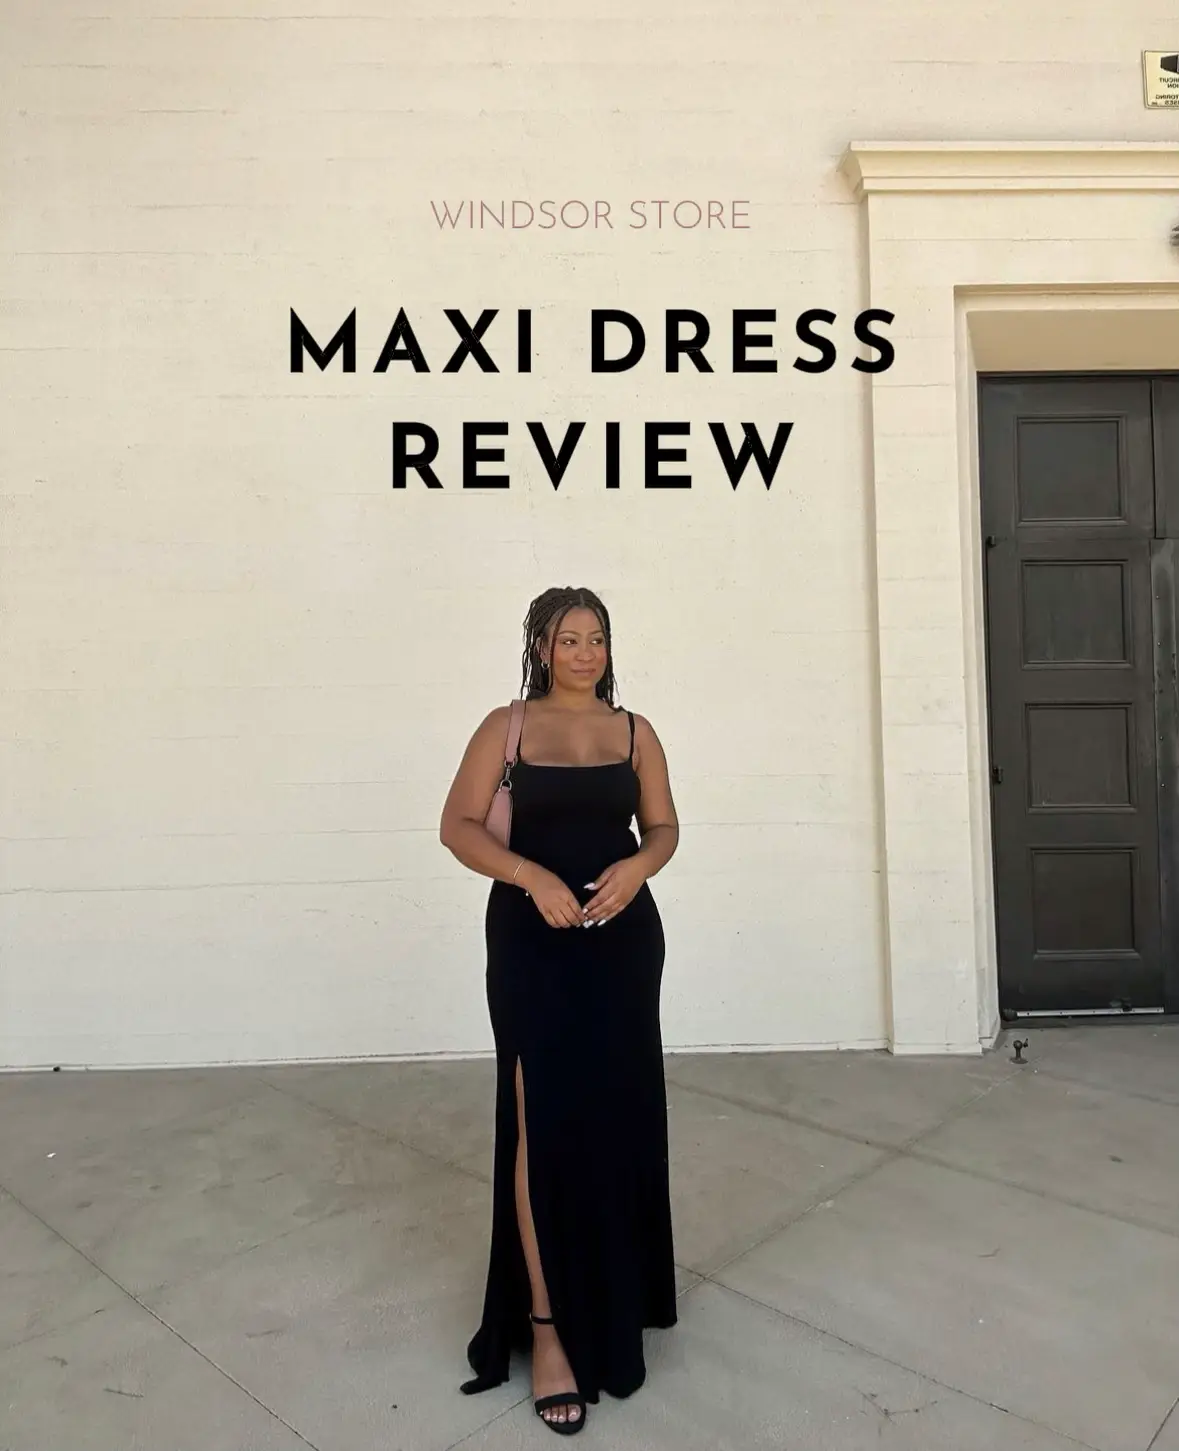 WINDSOR MAXI DRESS REVIEW, Gallery posted by sabriasparrow